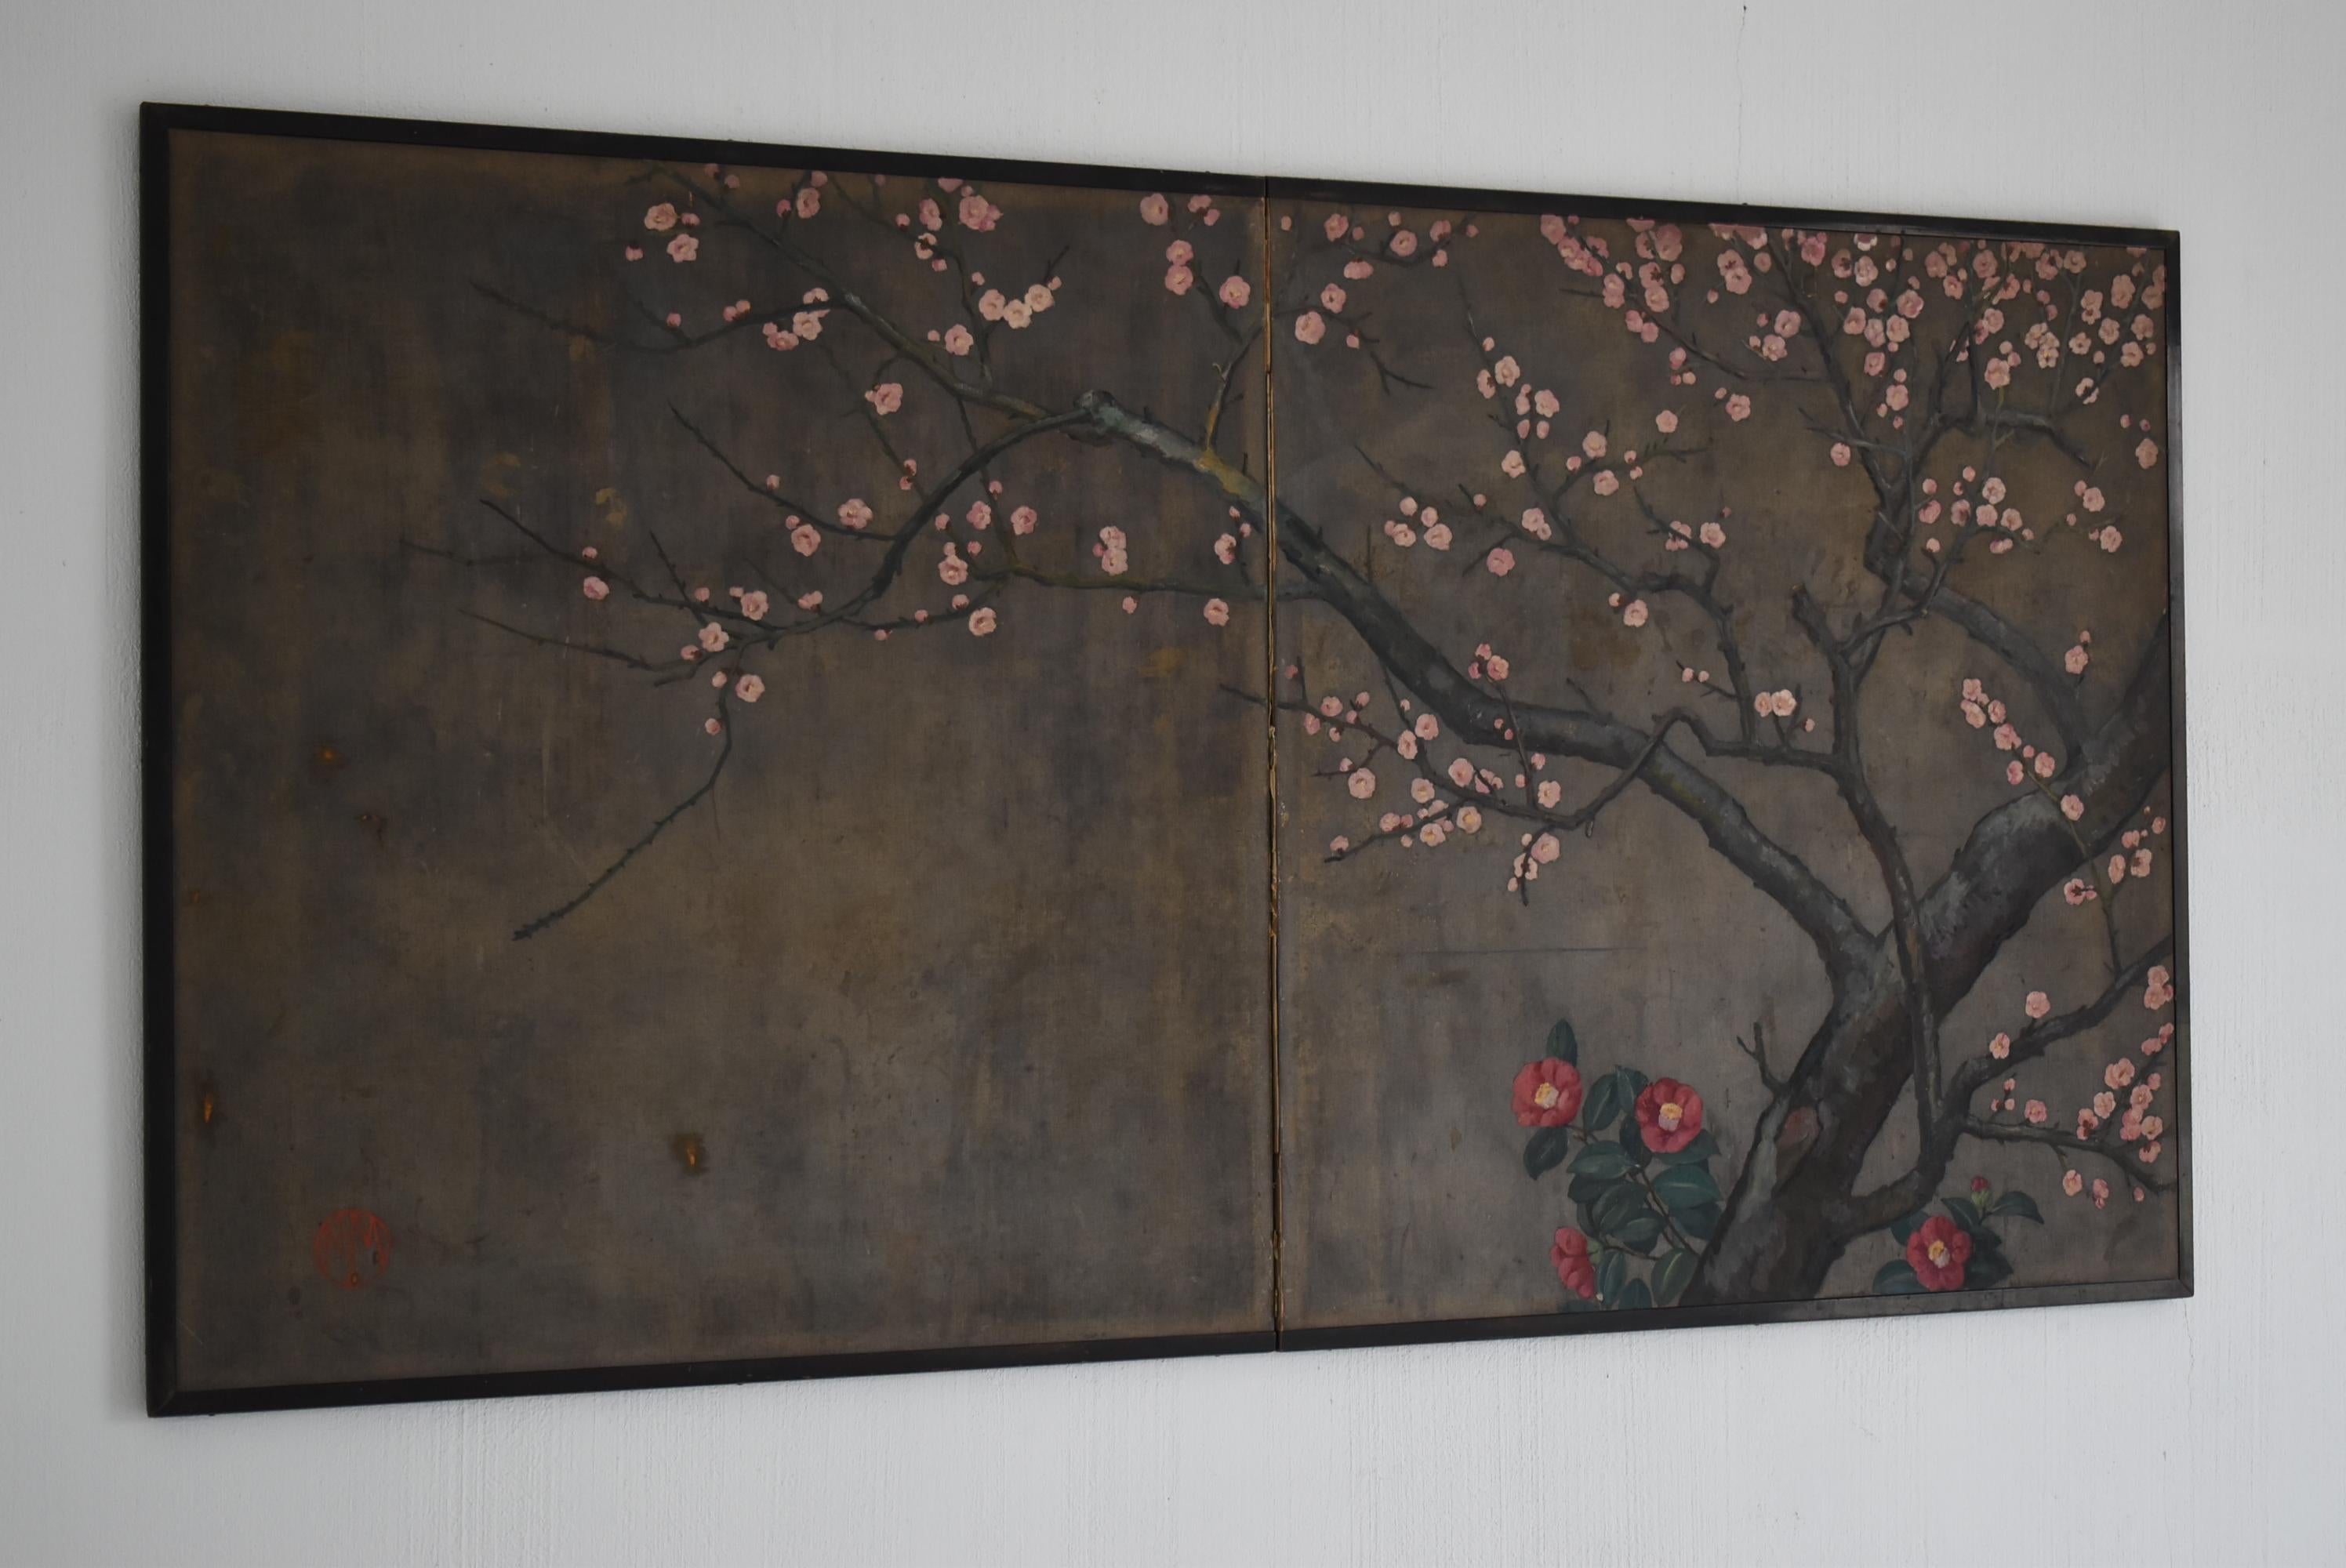 The picture is drawn on an old Japanese folding screen.
The author is unknown.
The era will be from 1900 to 1940.

Sakura and camellia are drawn.
You can feel the four seasons of Japan, 